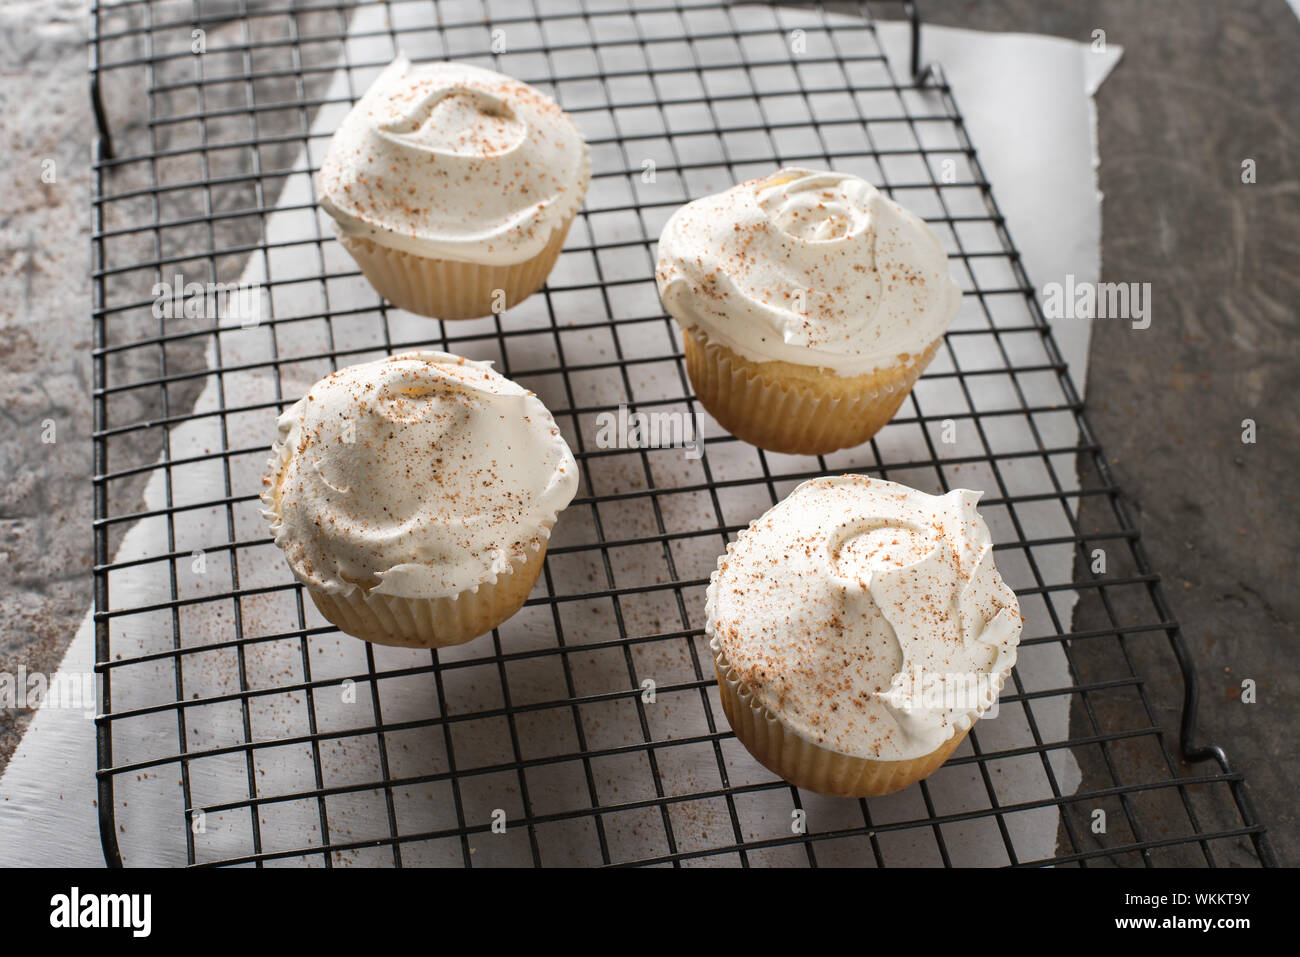 High Angle View Of Cupcakes On Cooling Rack Stock Photo